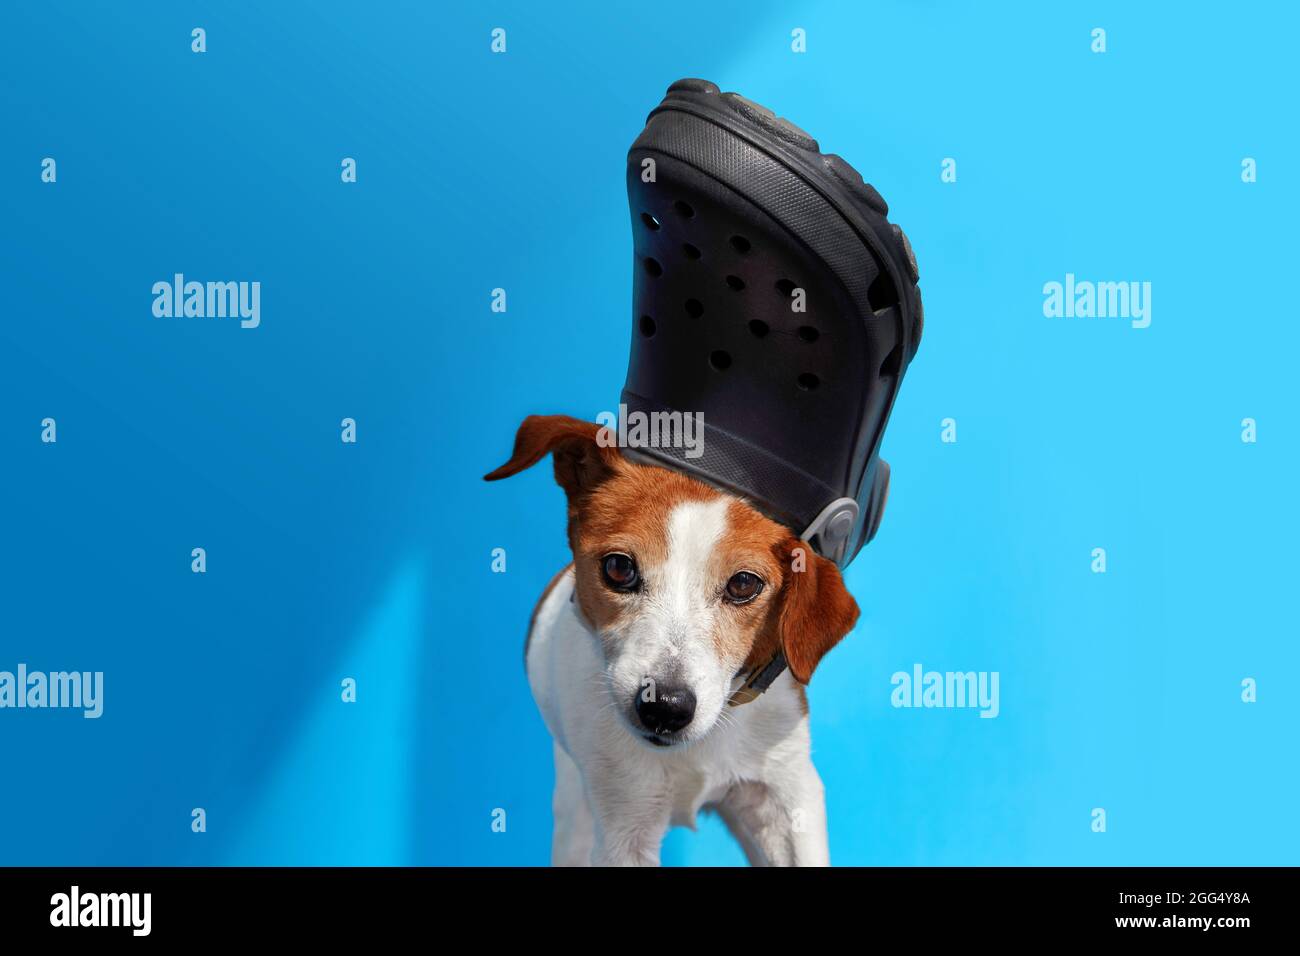 Cute spotted dog with black foam clog on head sticking out tongue and looking away against blue background Stock Photo